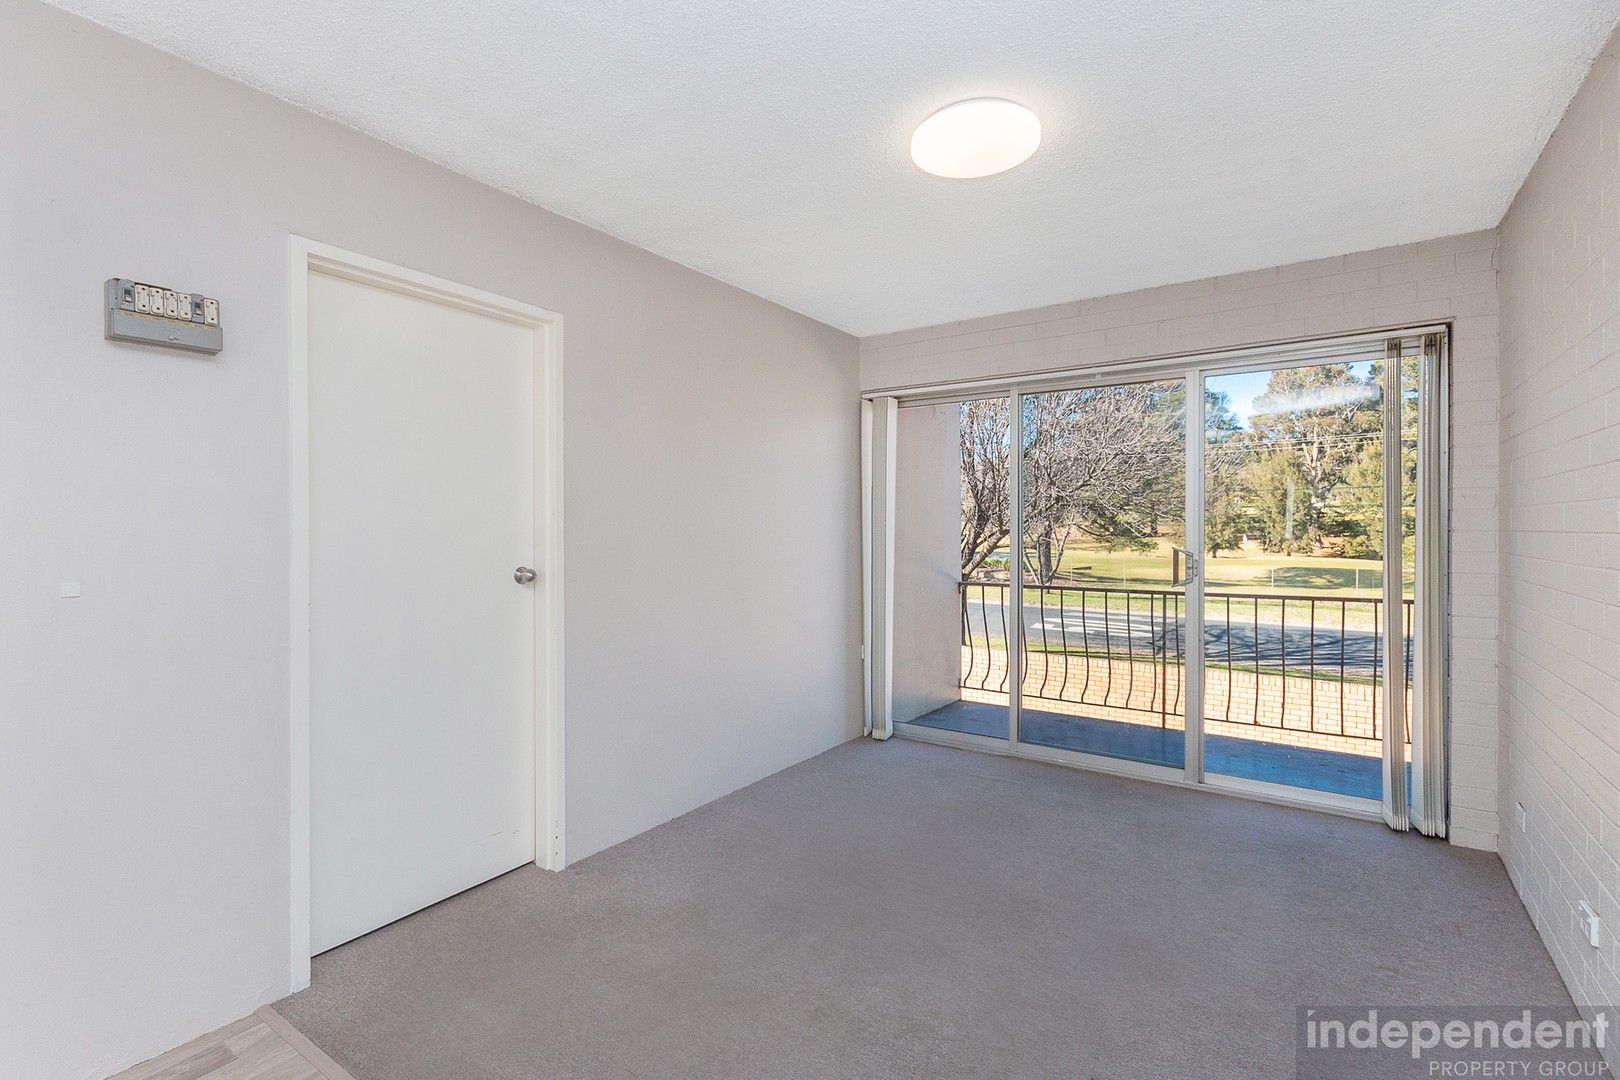 1 bedrooms Apartment / Unit / Flat in 2/63 Molonglo Street QUEANBEYAN EAST NSW, 2620